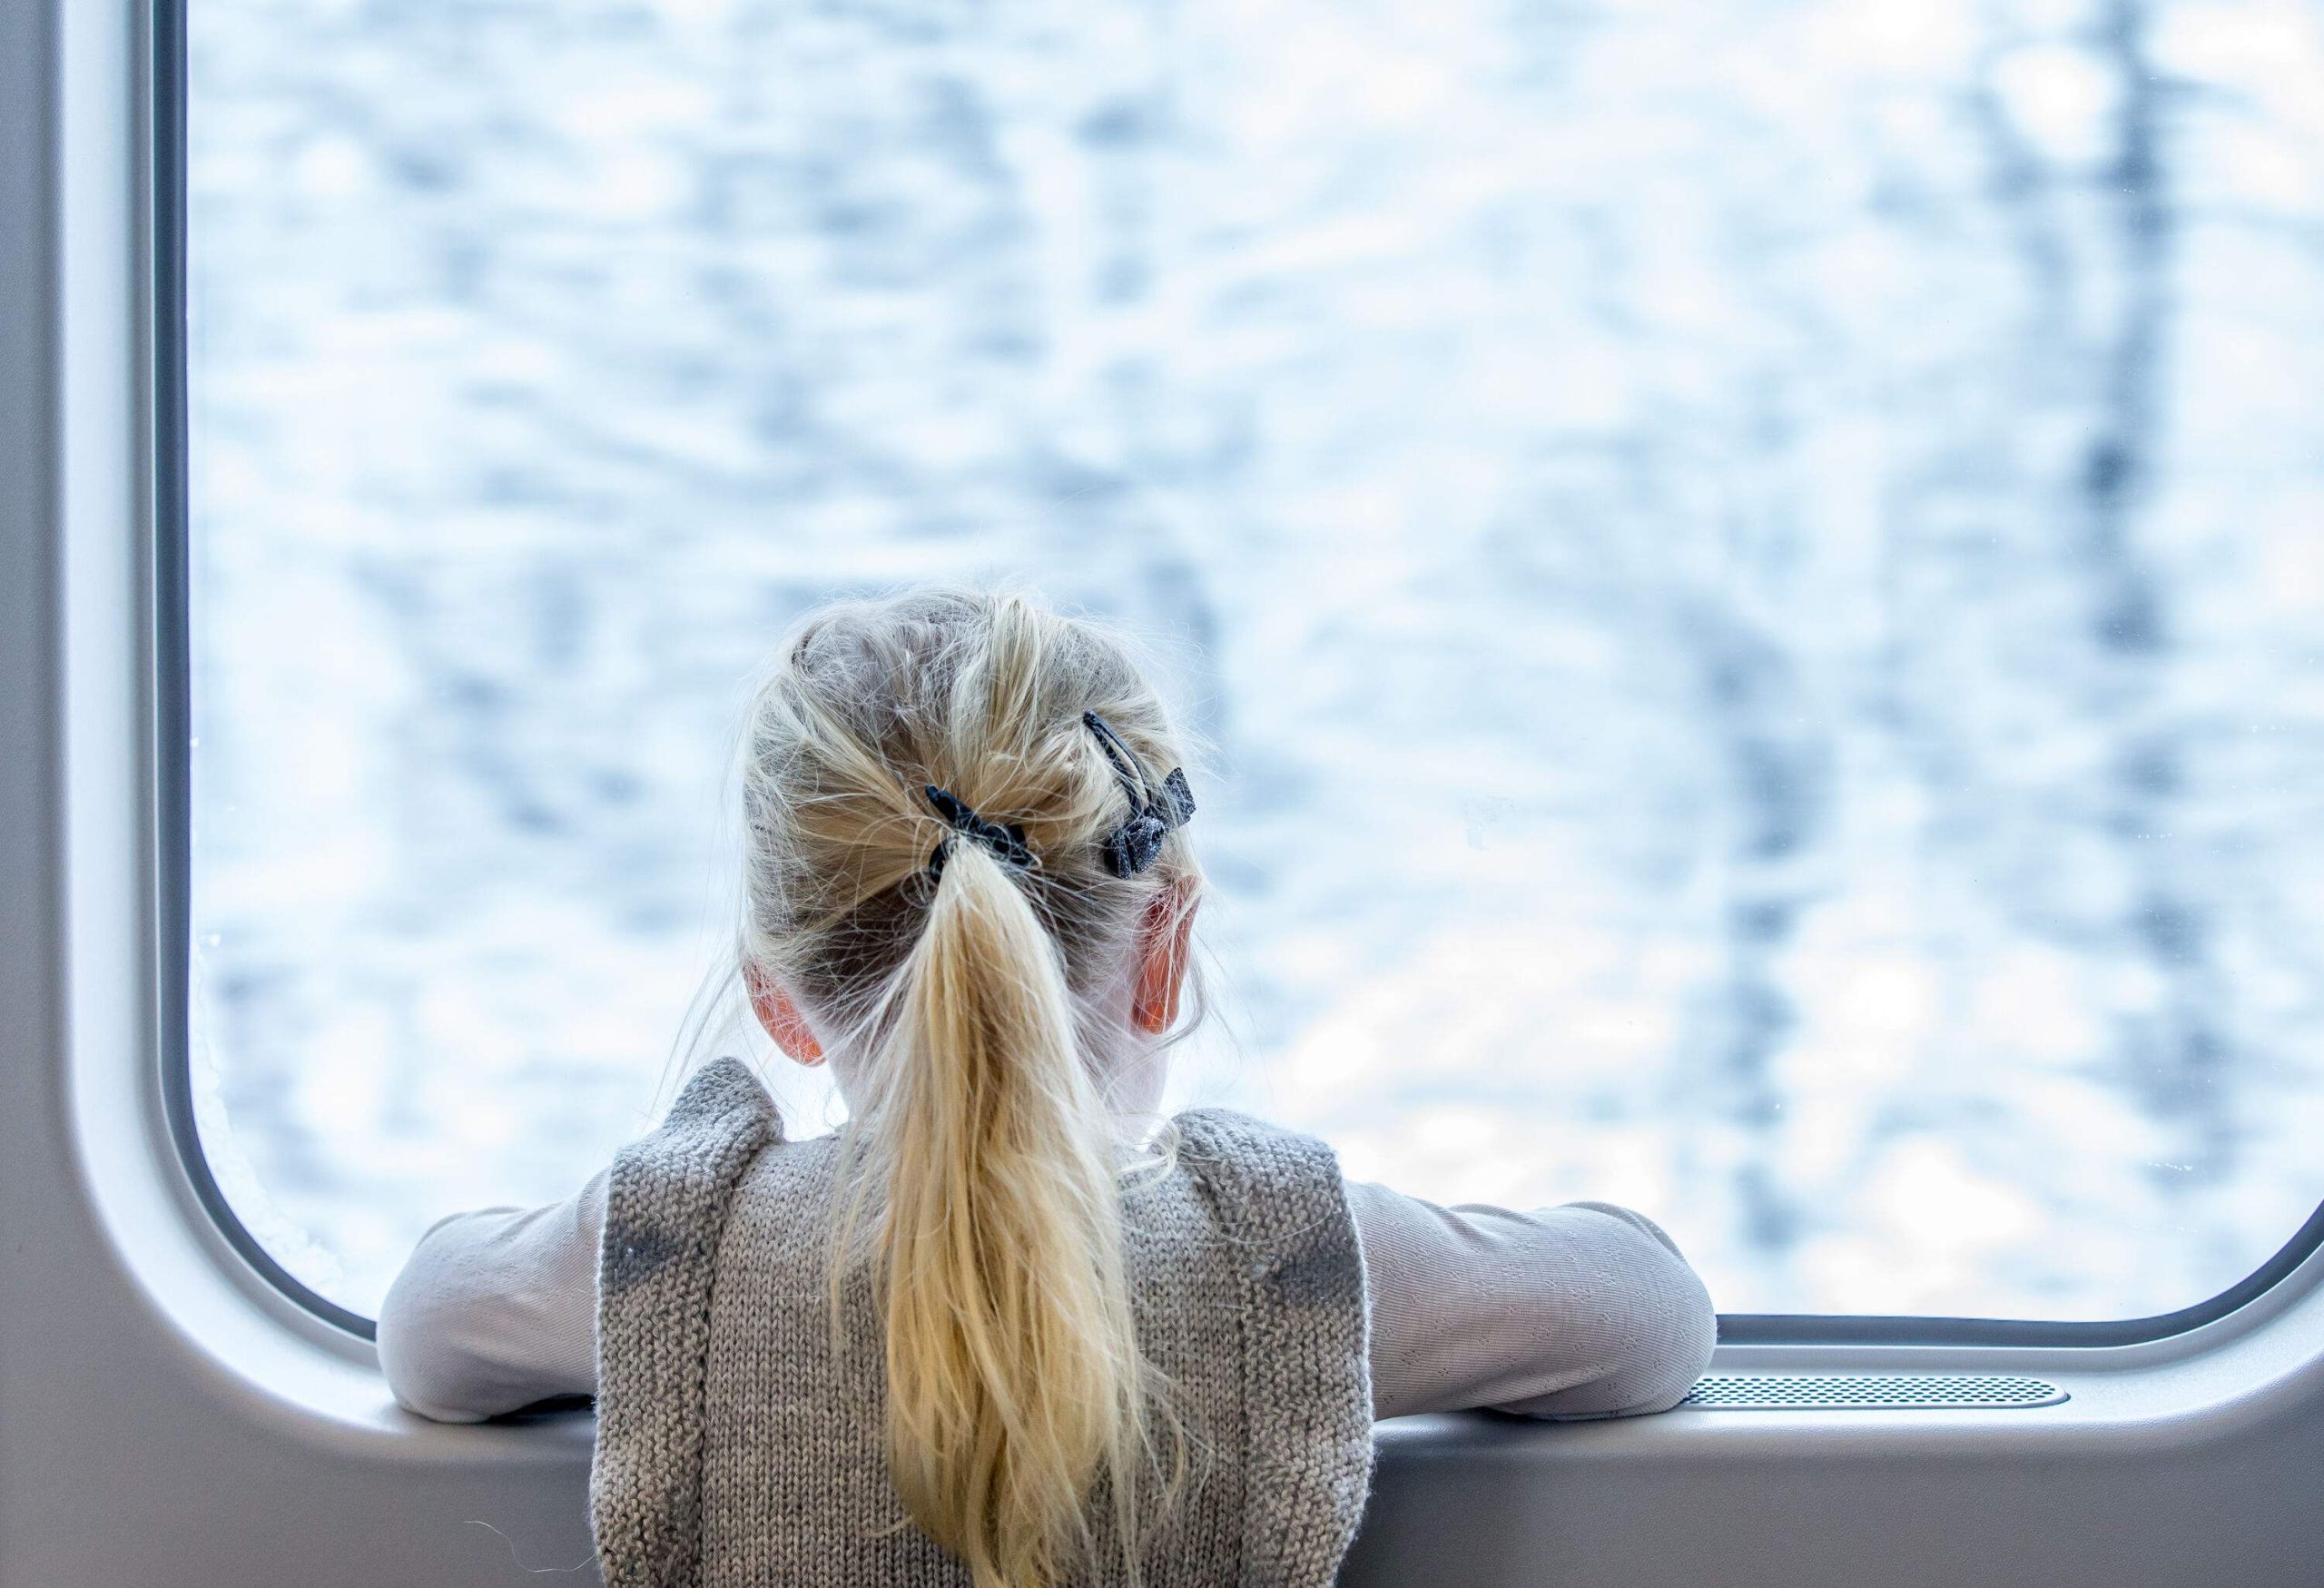 A blonde girl looks out a train's window.